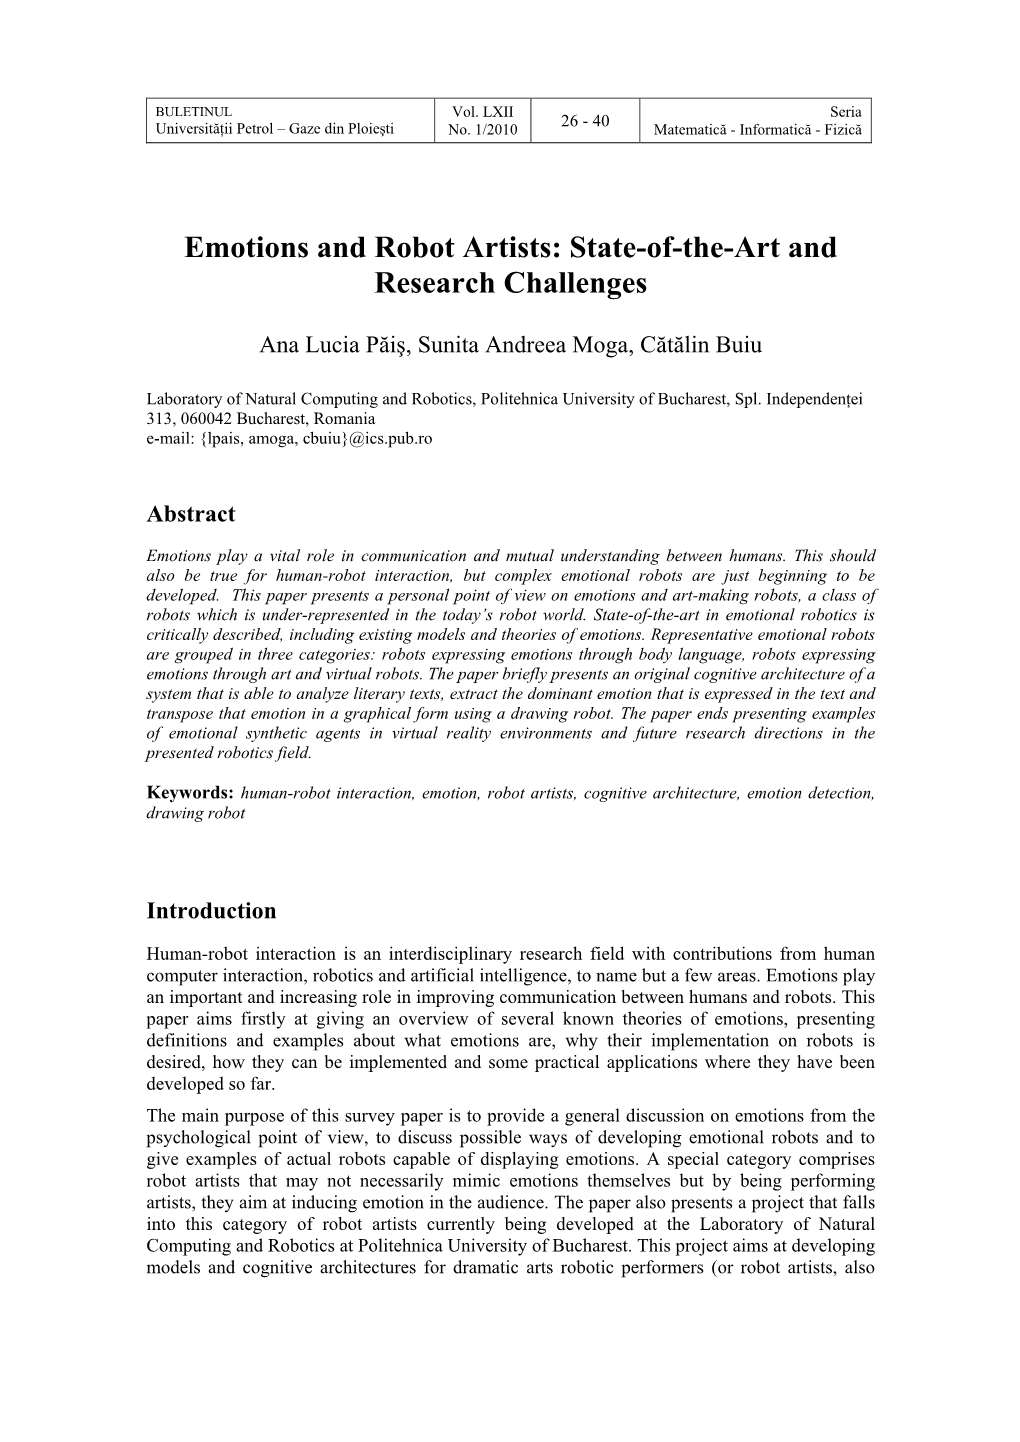 Emotions and Robot Artists: State-Of-The-Art and Research Challenges